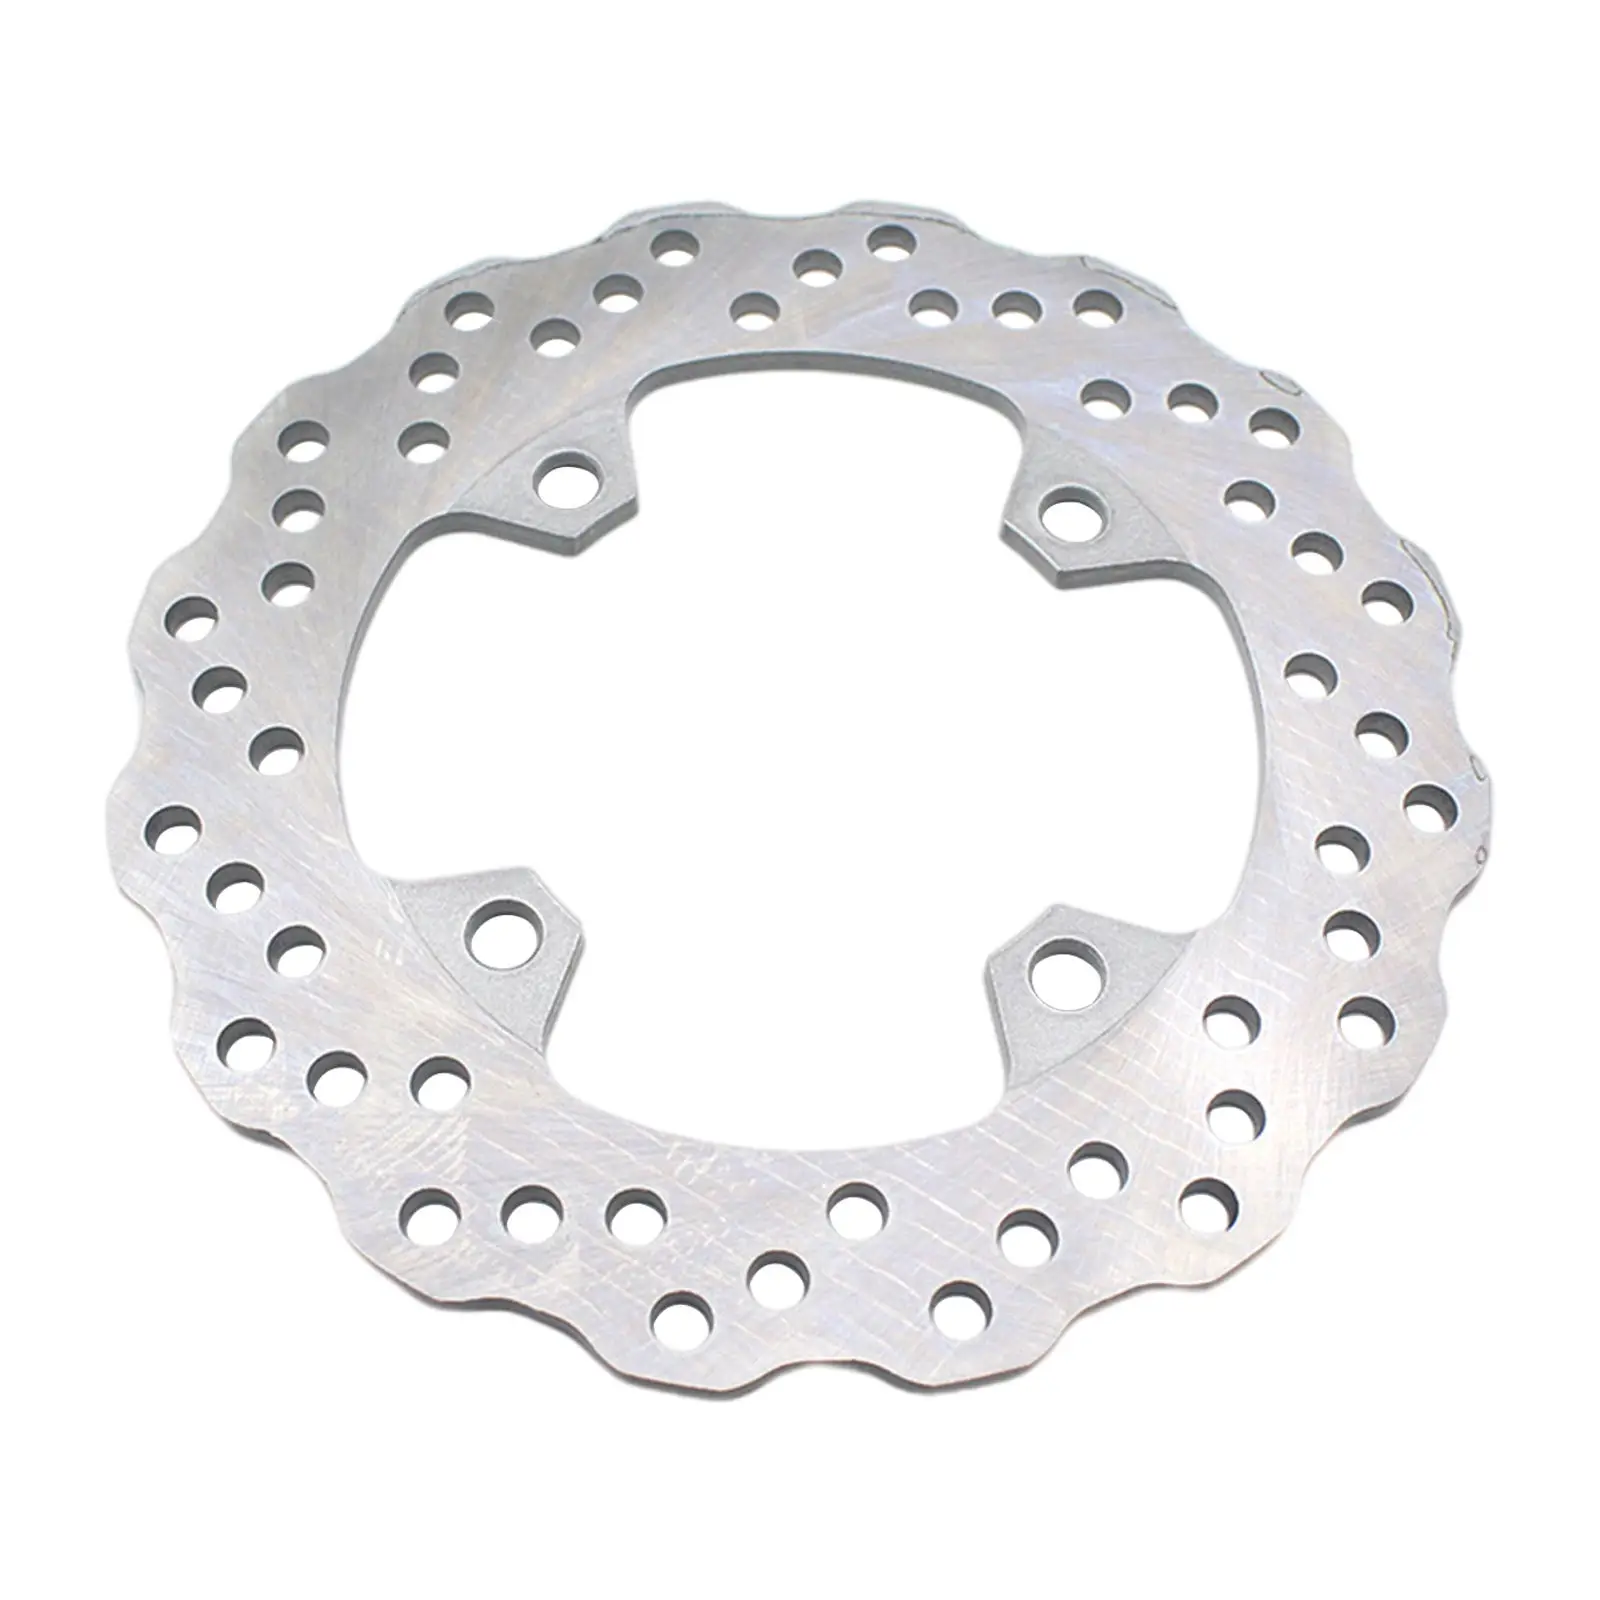 Rear Brake Disc Rotor Motorcycle Replacement Steel Fit for Kawasaki ZX6R ZX636 ZX-9R ZX9R